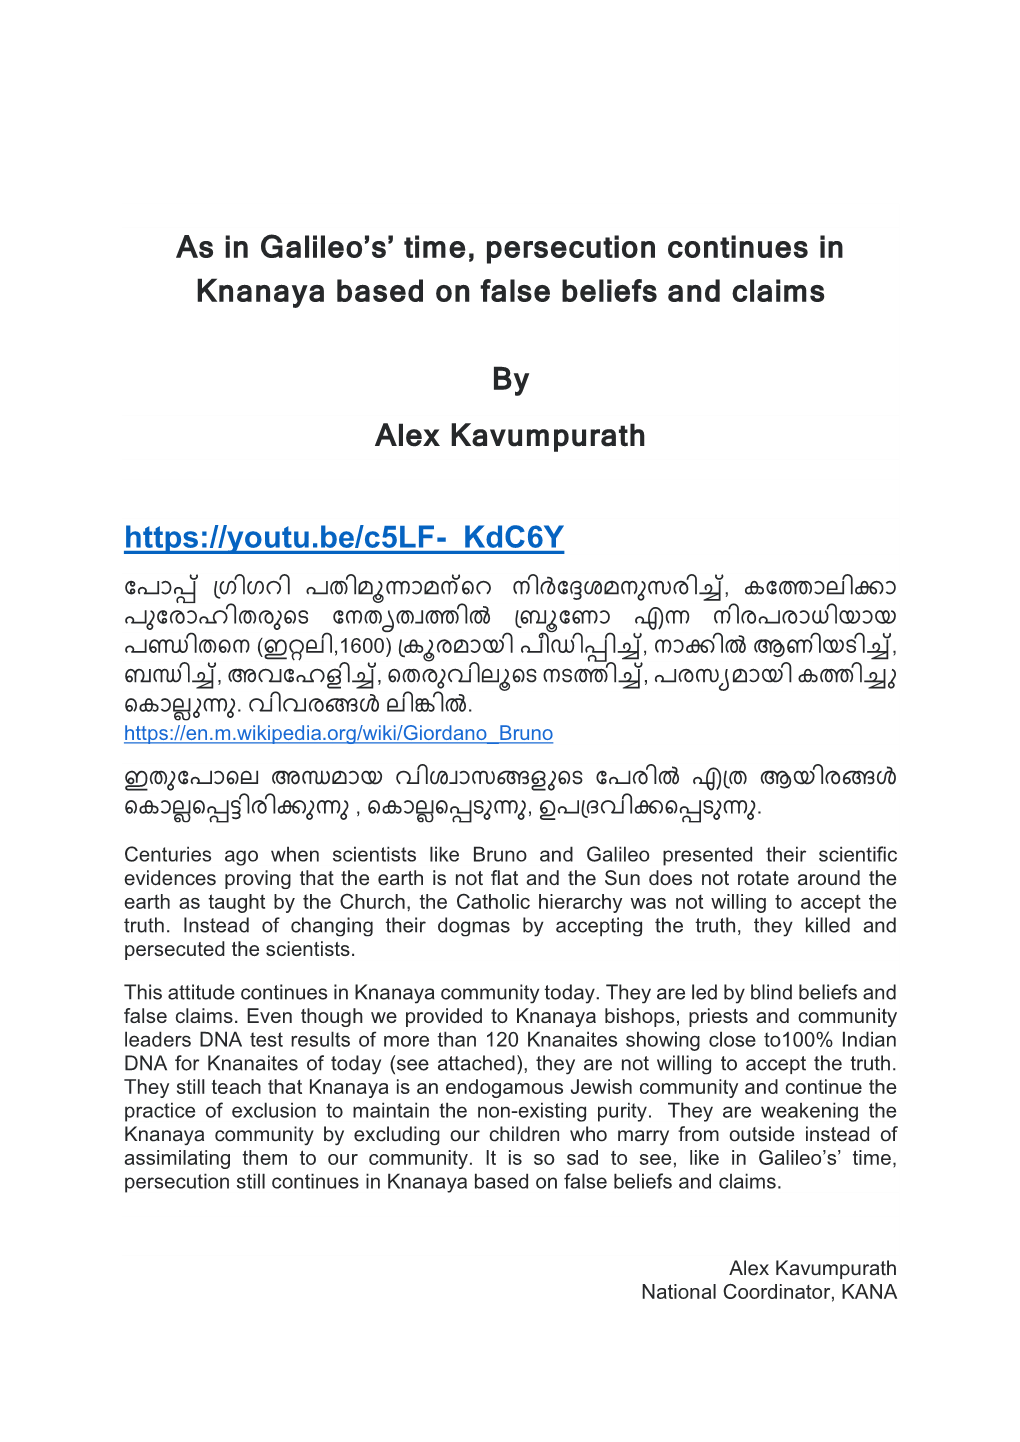 As in Galileo's' Time, Persecution Continues in Knanaya Based On